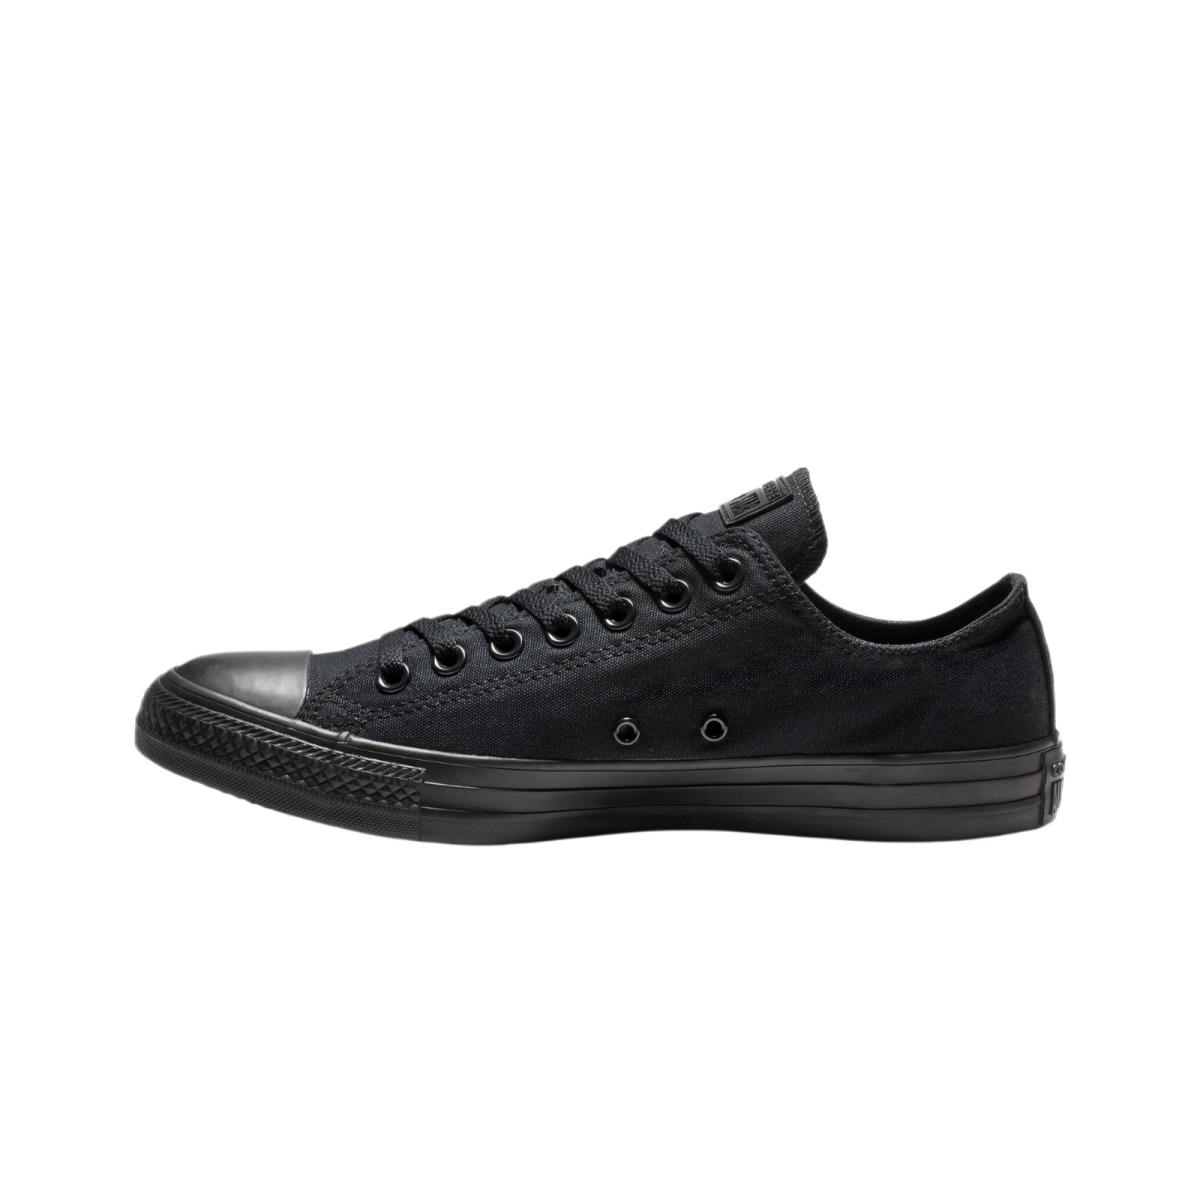 Converse Adult Unisex Chuck Taylor All Star Ox Low Top Black Mono Sneaker M5039